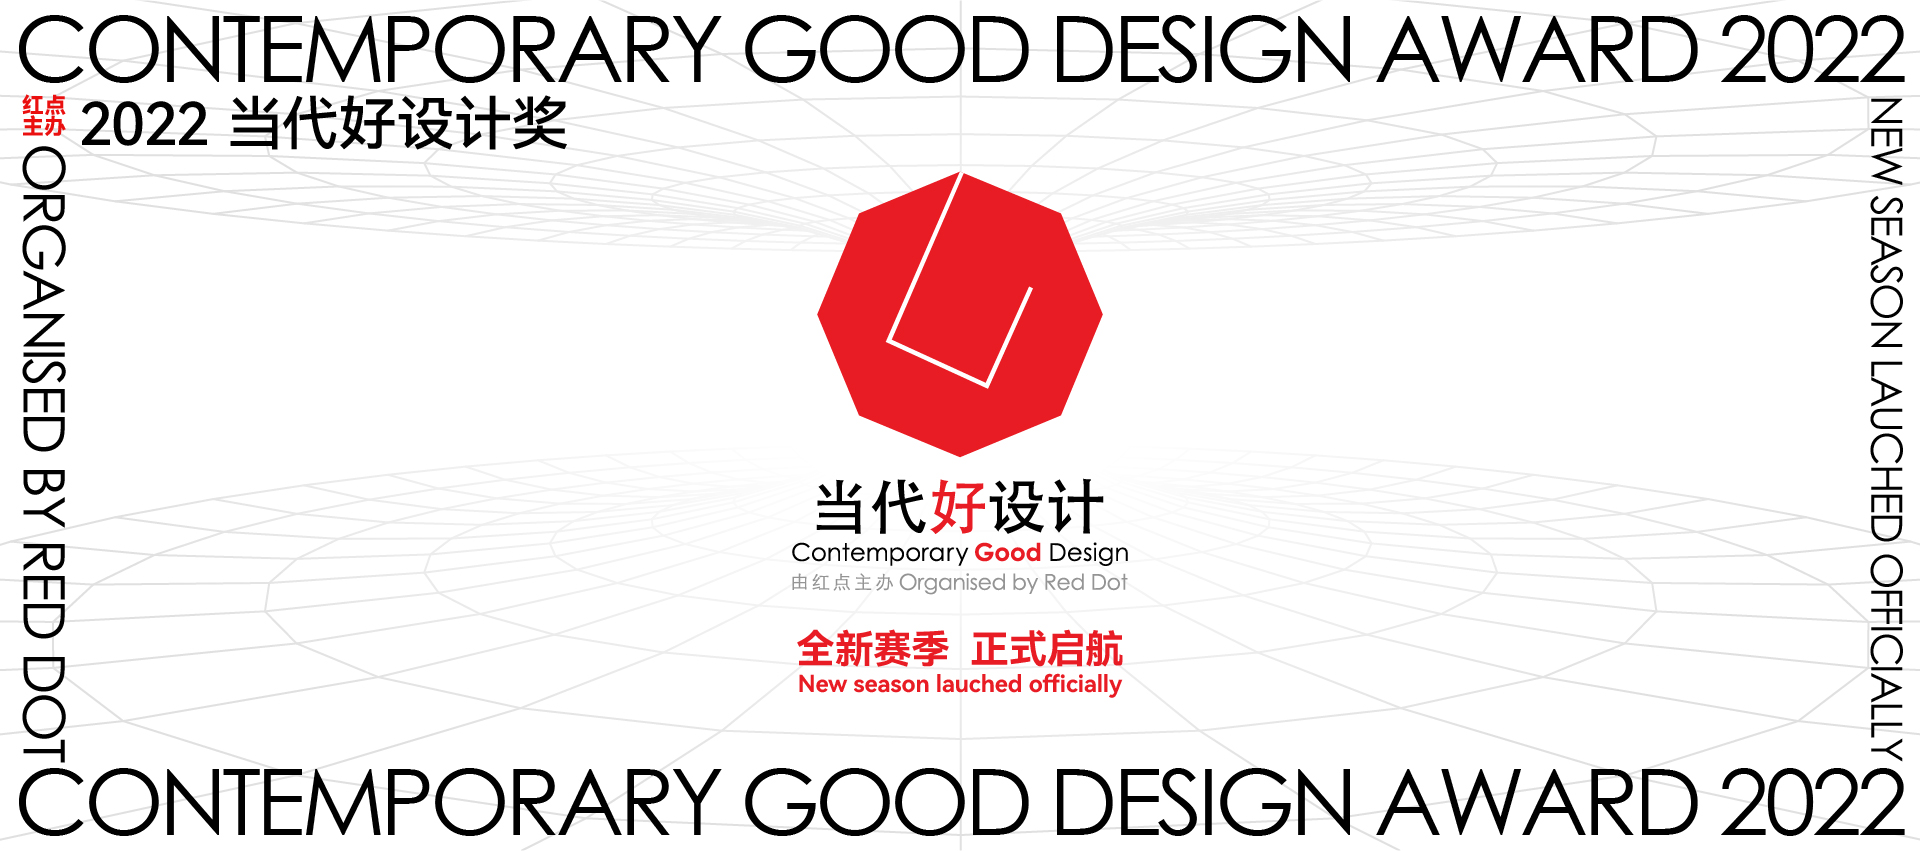 2022 Contemporary Good Design Award: Call for Global Entries Contemporary Good Design: Smart Product Drives Industrial Upgrading